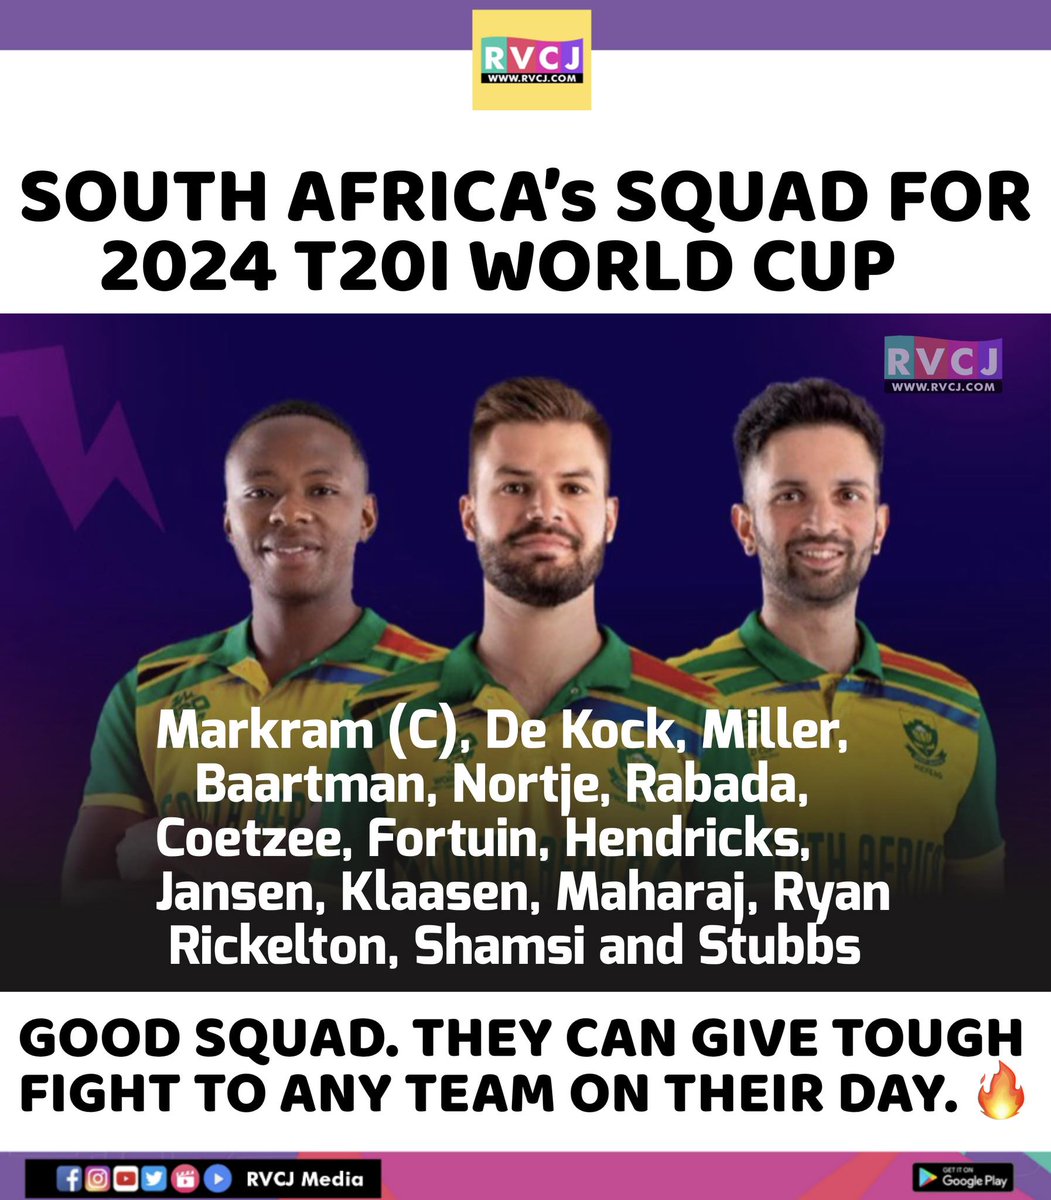 South Africa's Squad for 2024 T20I World Cup 🇿🇦